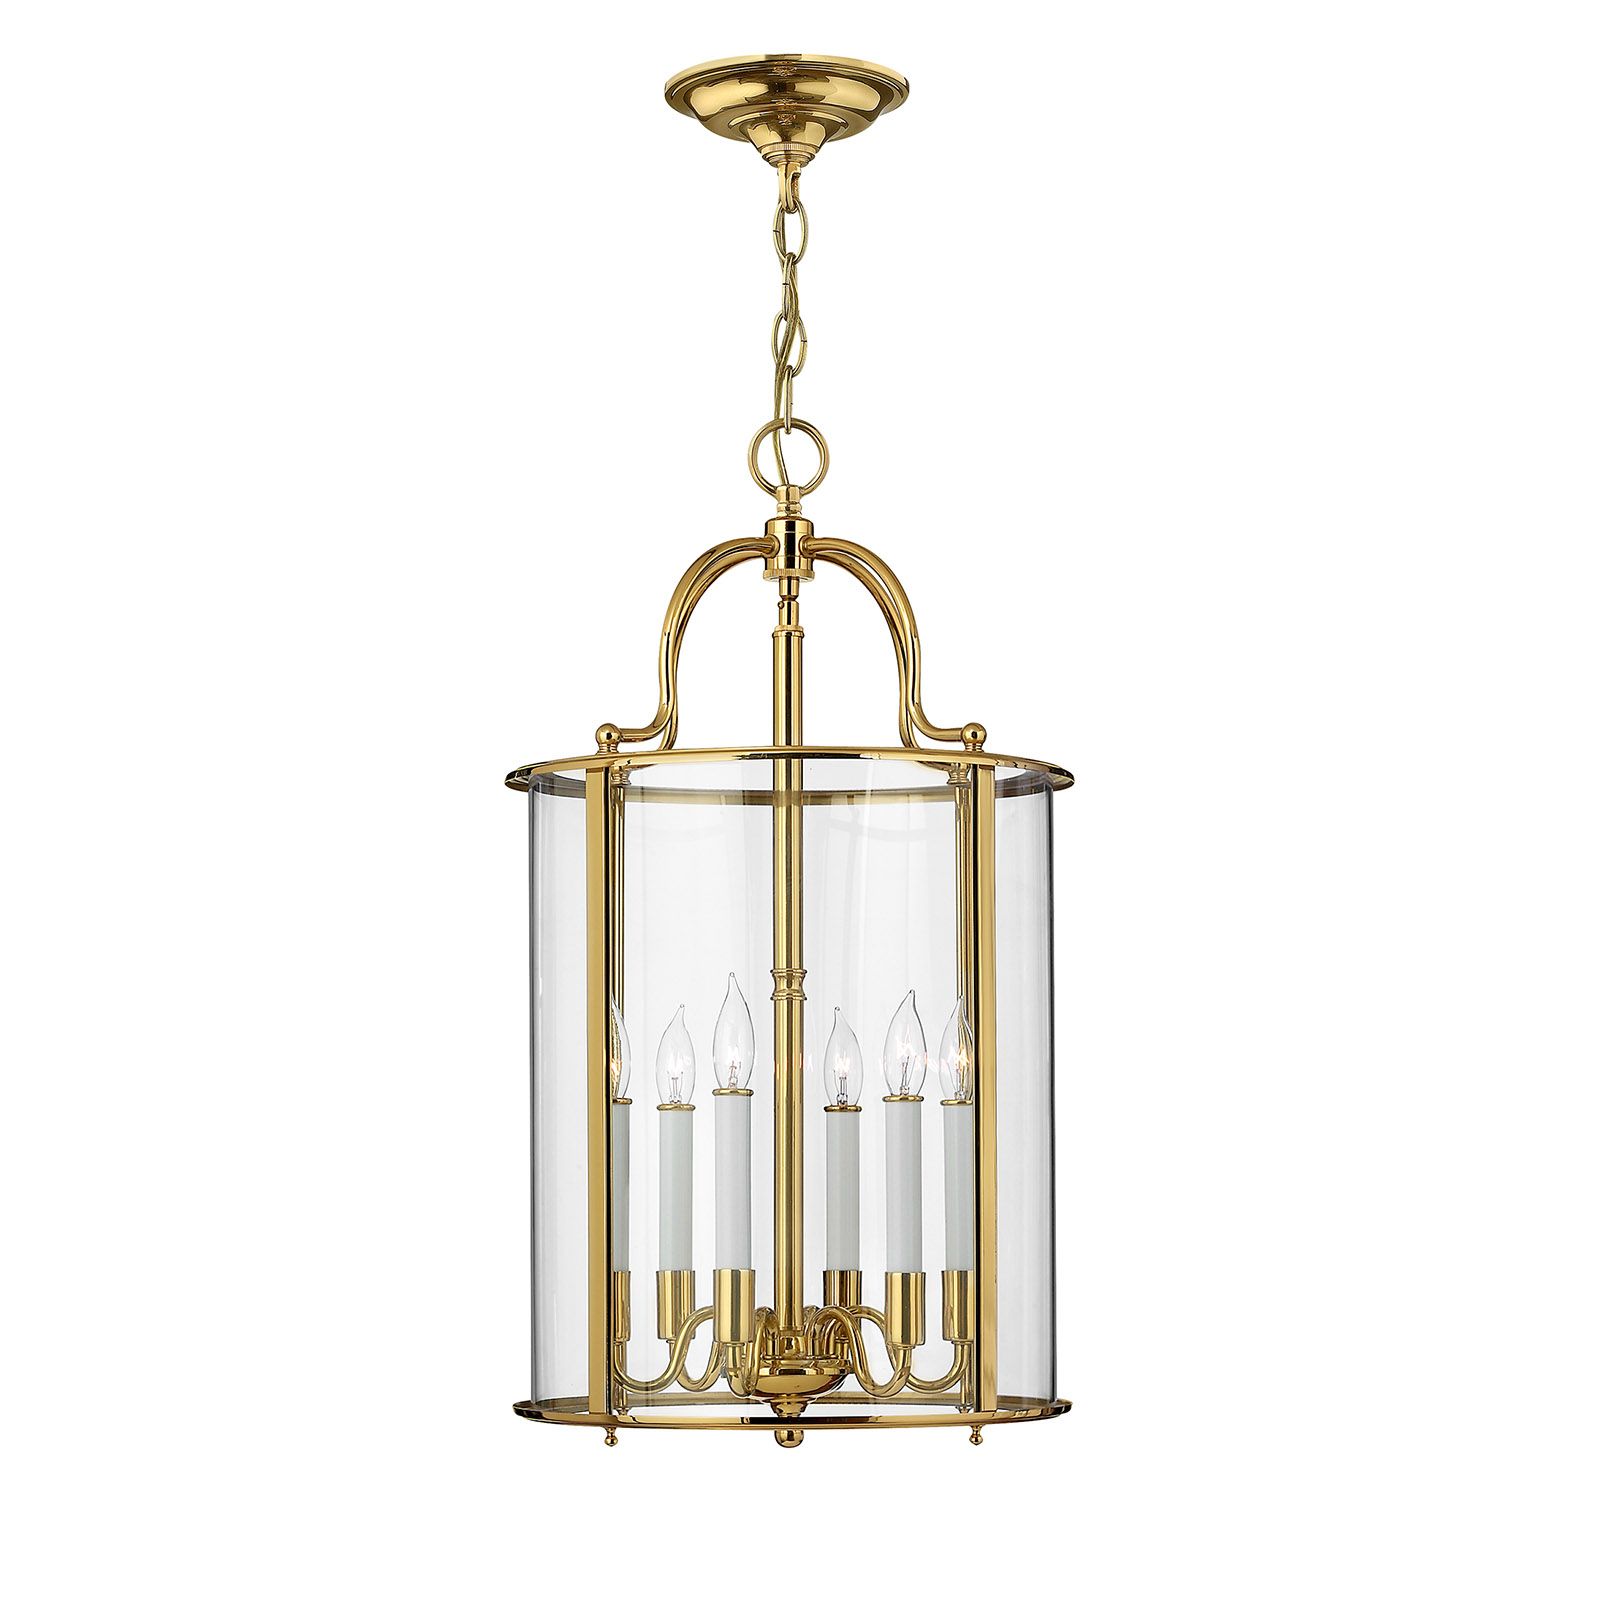 Gentry large pendant in polished brass